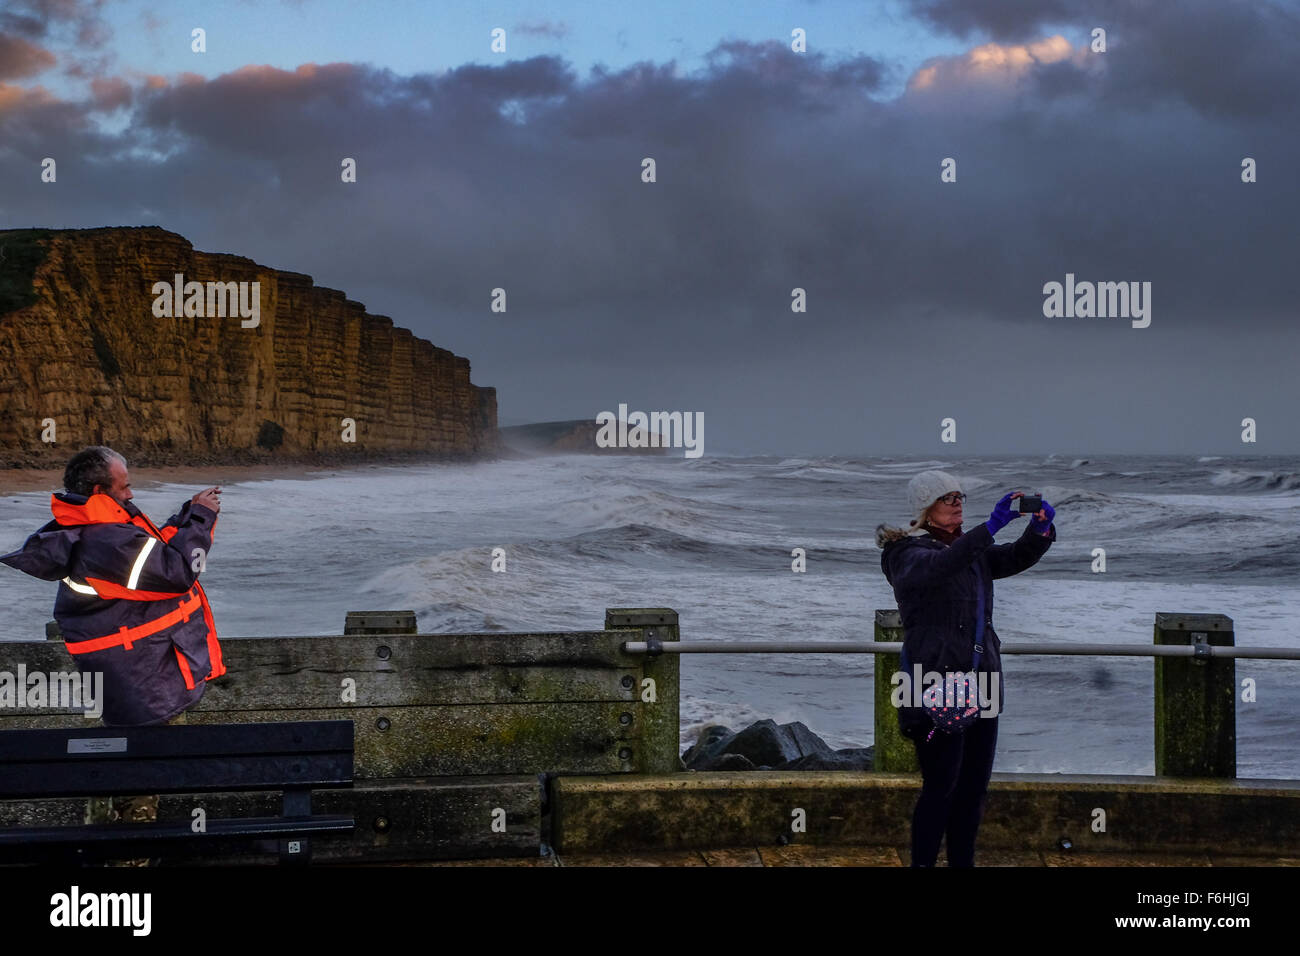 West Bay, Dorset, UK. 17th Nov, 2015. People photograph the waves at West Bay on the Dorset Coast as Storm Barney begins to make itself felt on the south coast. Gusts 40-50 mph are expected across the southern England with gusts of 50-60 likely in coastal areas. Adverse sea conditions have lead to Condor Ferries canceling high-speed ferry service to the Channel Islands stating 'wave heights are currently forecast to exceed our legal operating limits for High Speed Craft.' © Tom Corban/Alamy Live News Credit:  Tom Corban/Alamy Live News Stock Photo